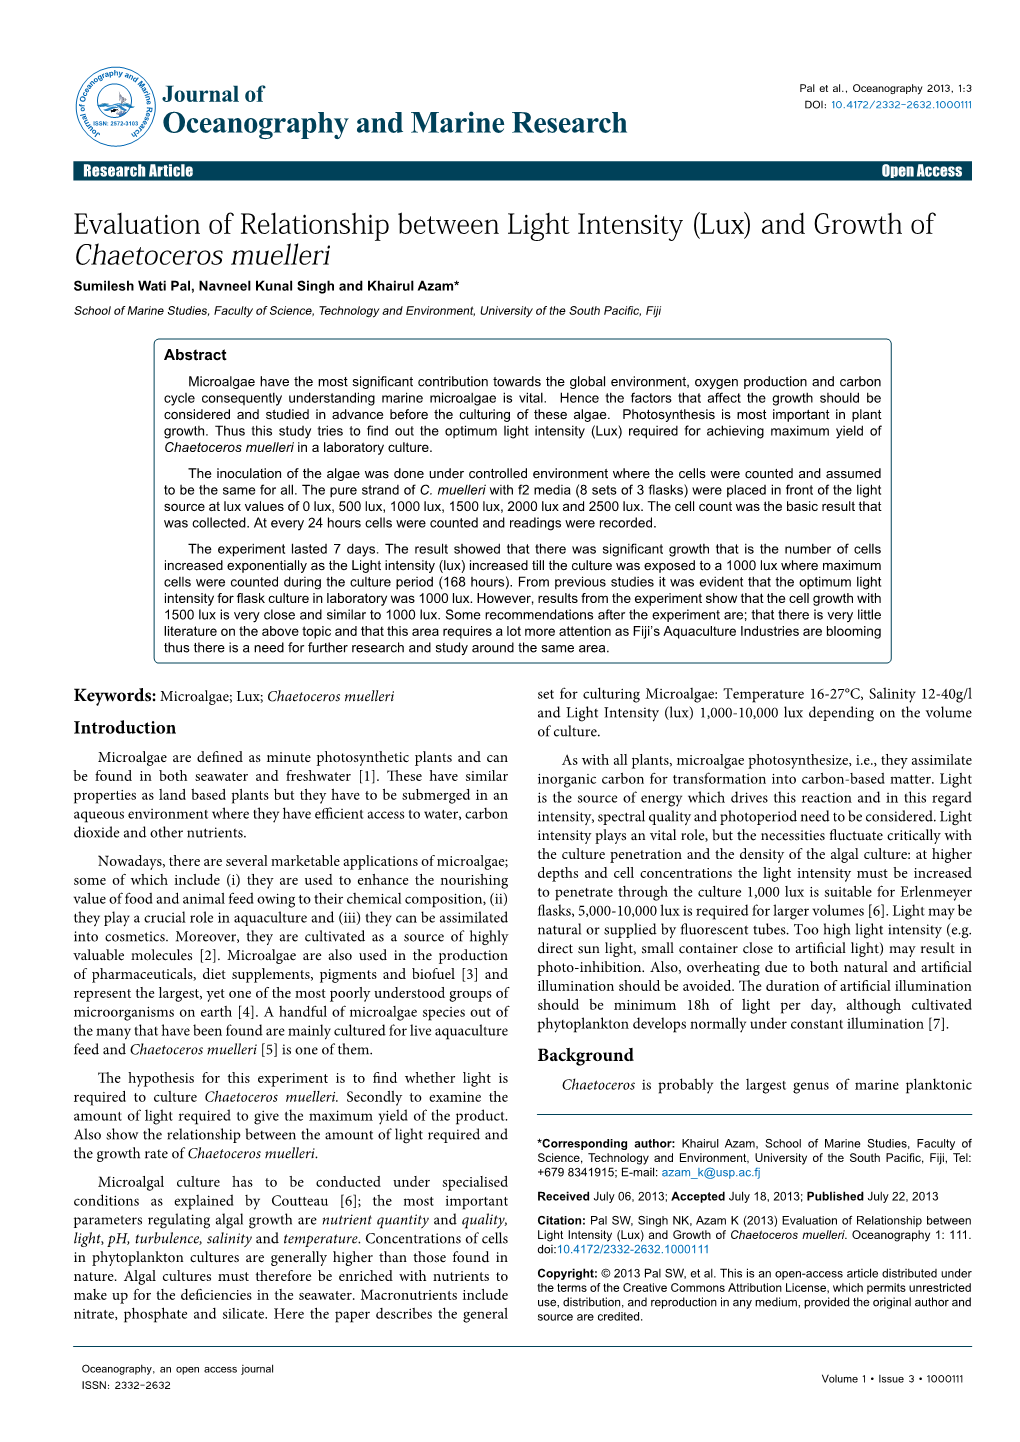 Evaluation of Relationship Between Light Intensity (Lux) and Growth Of